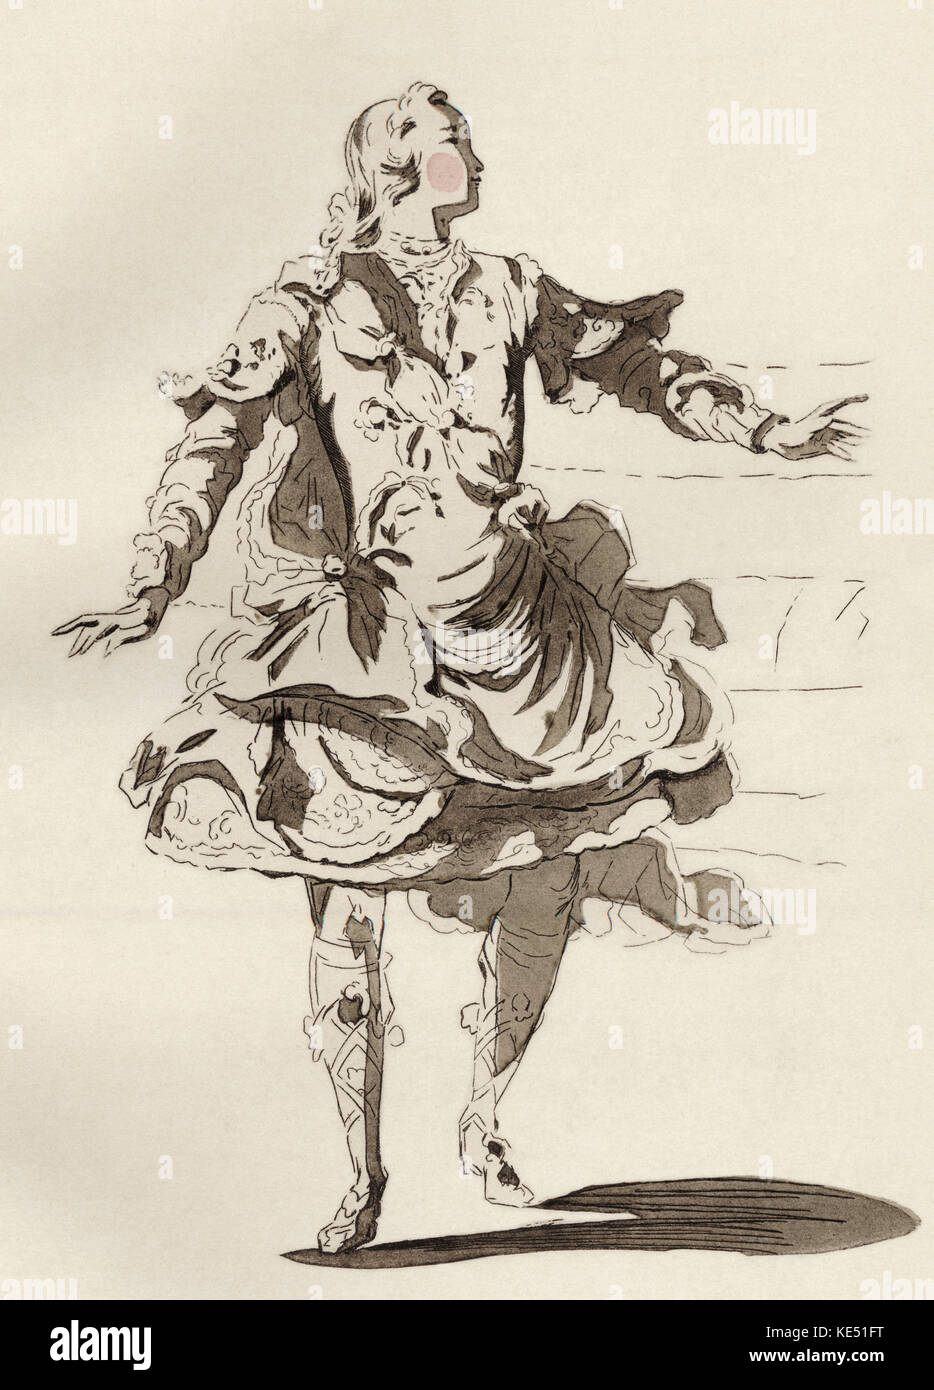 Pygmalion - opera by French composer Jean-Philippe Rameau. Costume design for Pierre Jeliotte in role of Pygmalion. Artist unknown. JPR: 25 September 1683 - 12 September 1764. Stock Photo